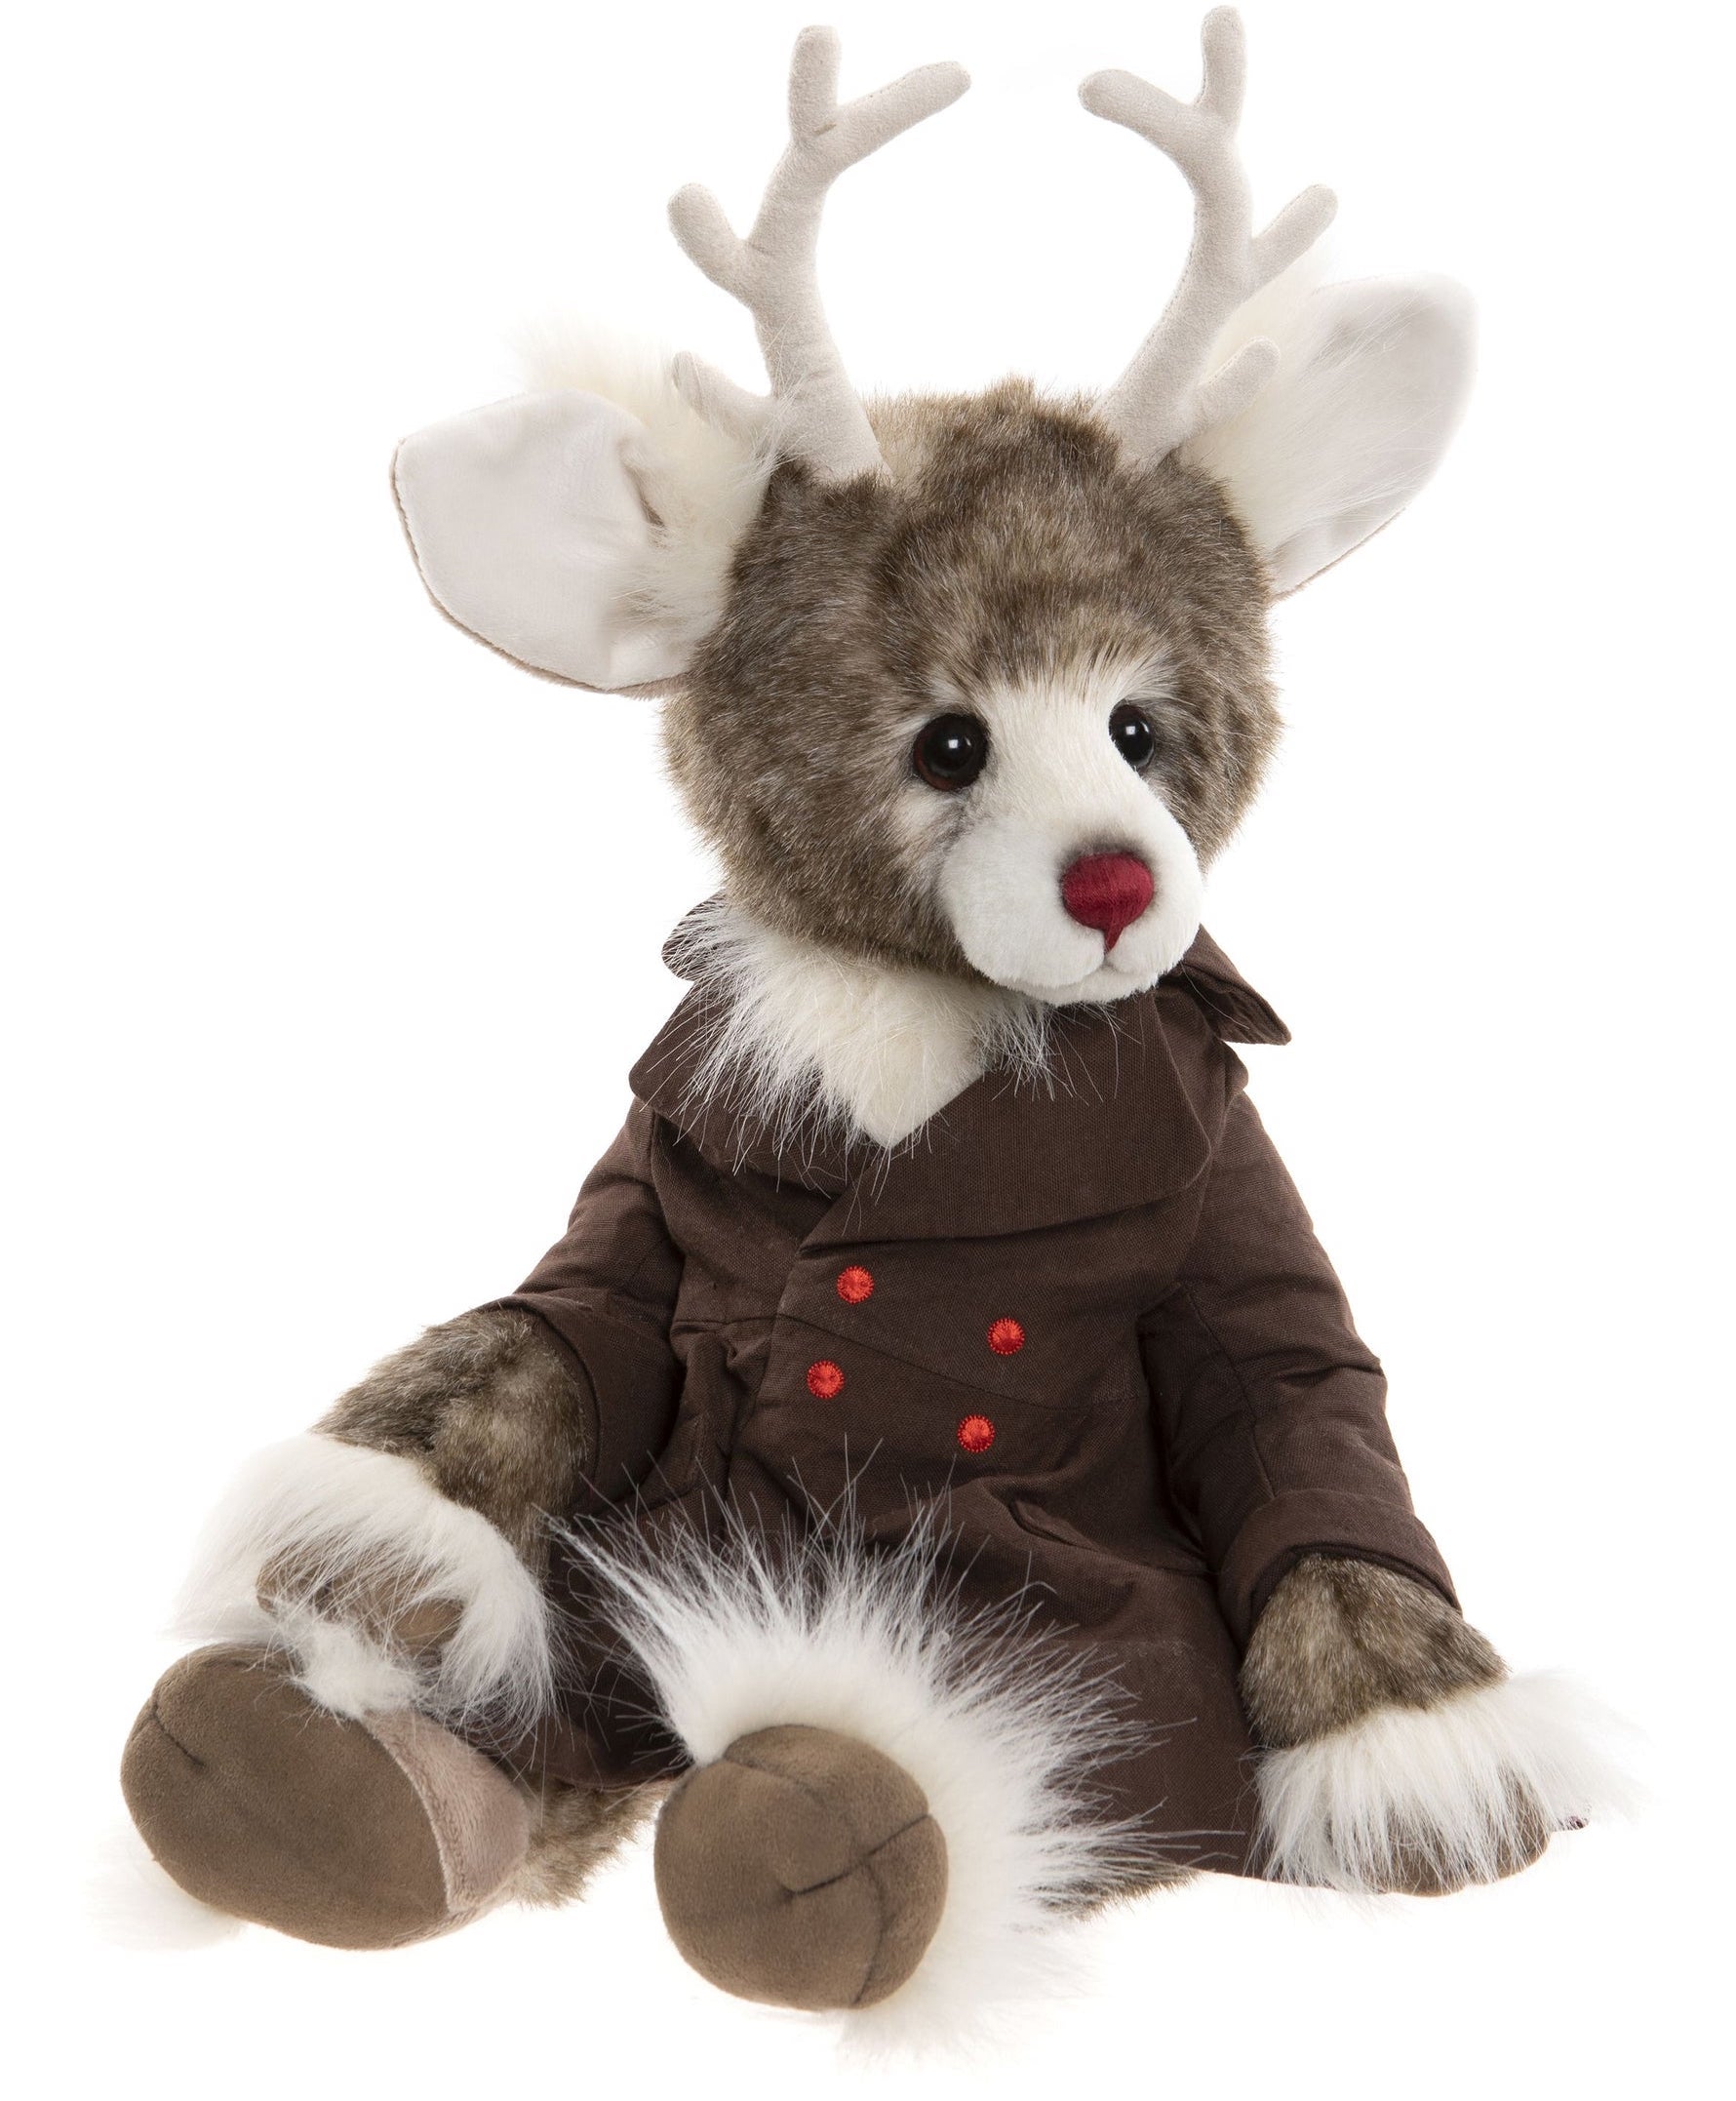 Rudolph the Red Nosed Reindeer by Charlie Bears